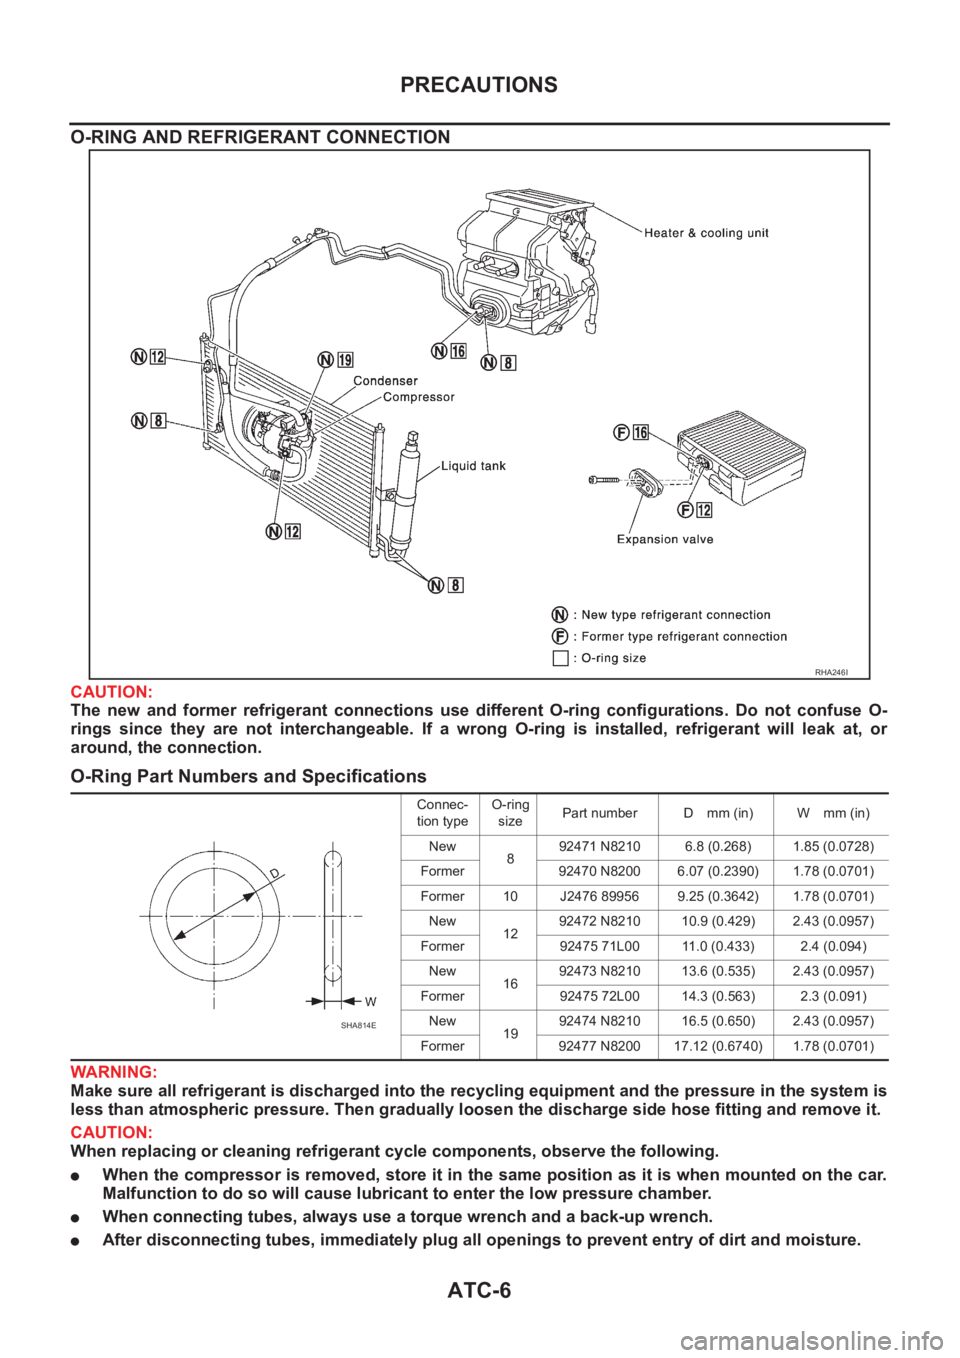 NISSAN ALMERA N16 2003  Electronic Repair Manual ATC-6
PRECAUTIONS
O-RING AND REFRIGERANT CONNECTION
CAUTION:
The  new  and  former  refrigerant  connections  use  different  O-ring  configurations.  Do  not  confuse  O-
rings  since  they  are  not